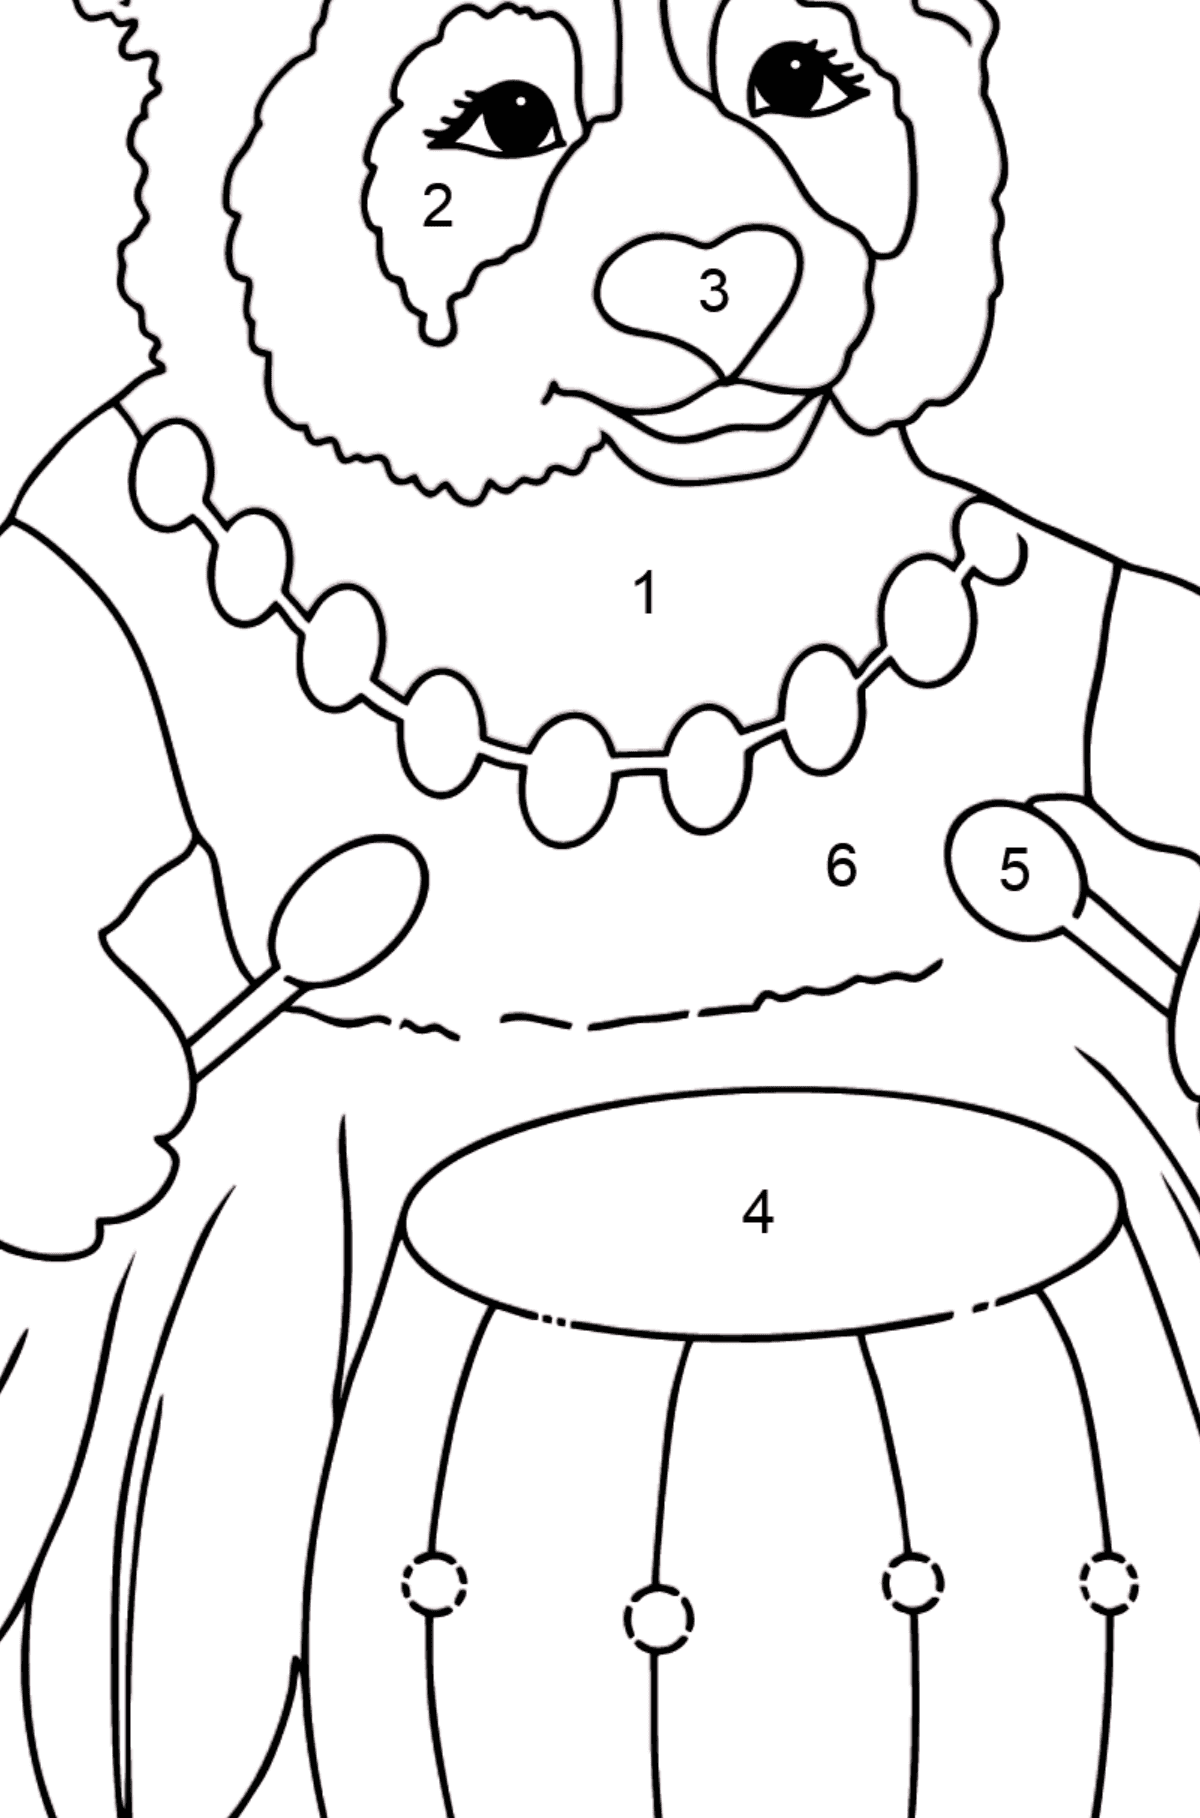 Panda For Kids (Simple) coloring page - Coloring by Numbers for Kids